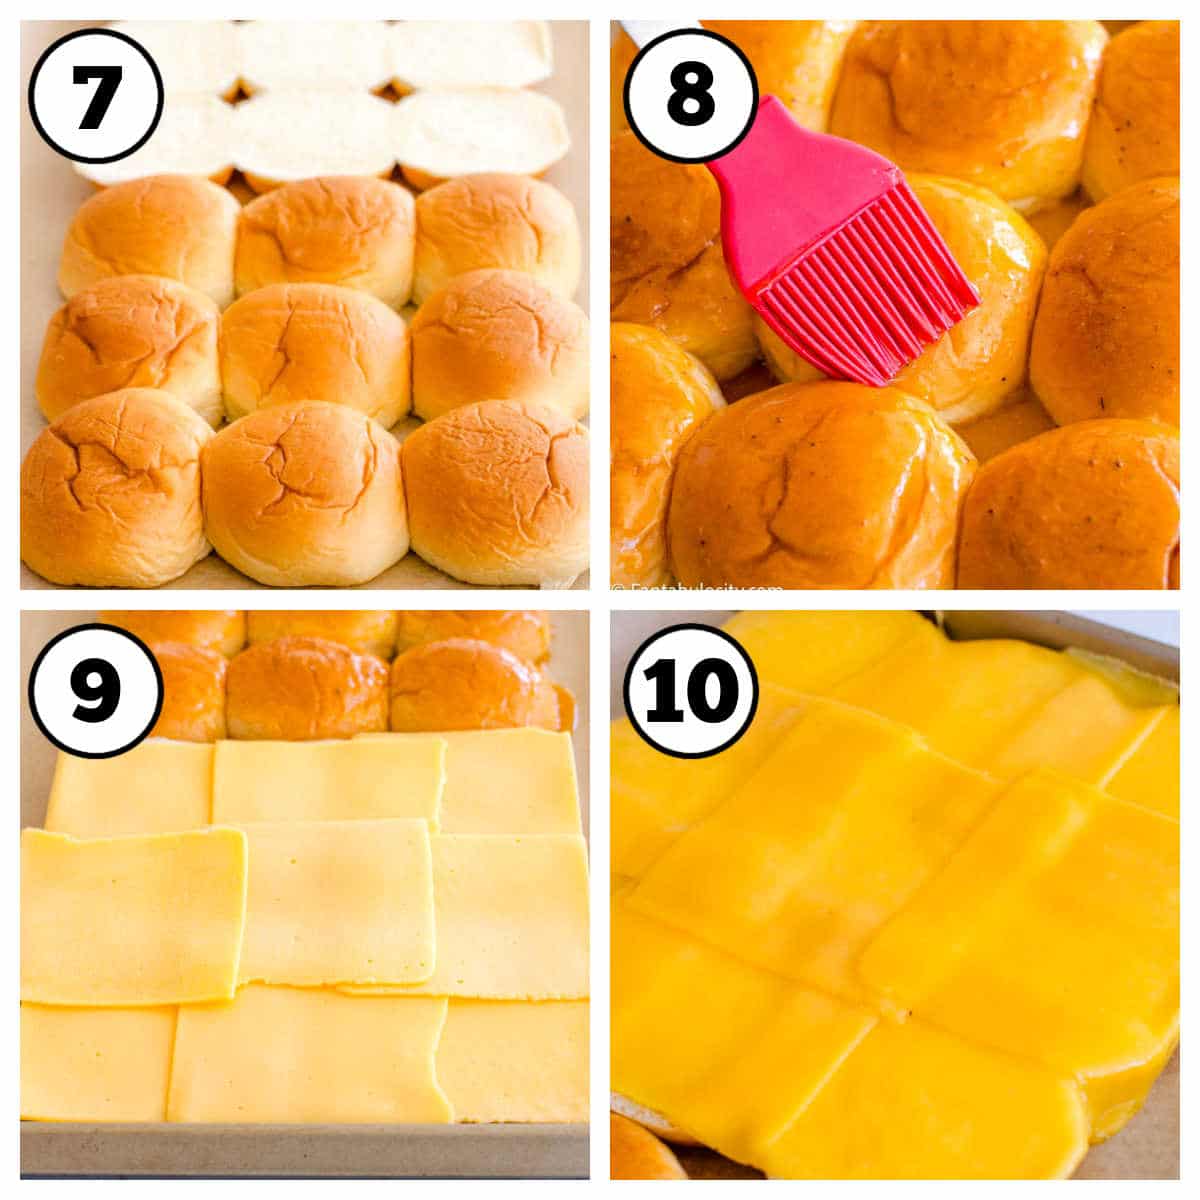 Steps 7-10 of how to make fish sliders.